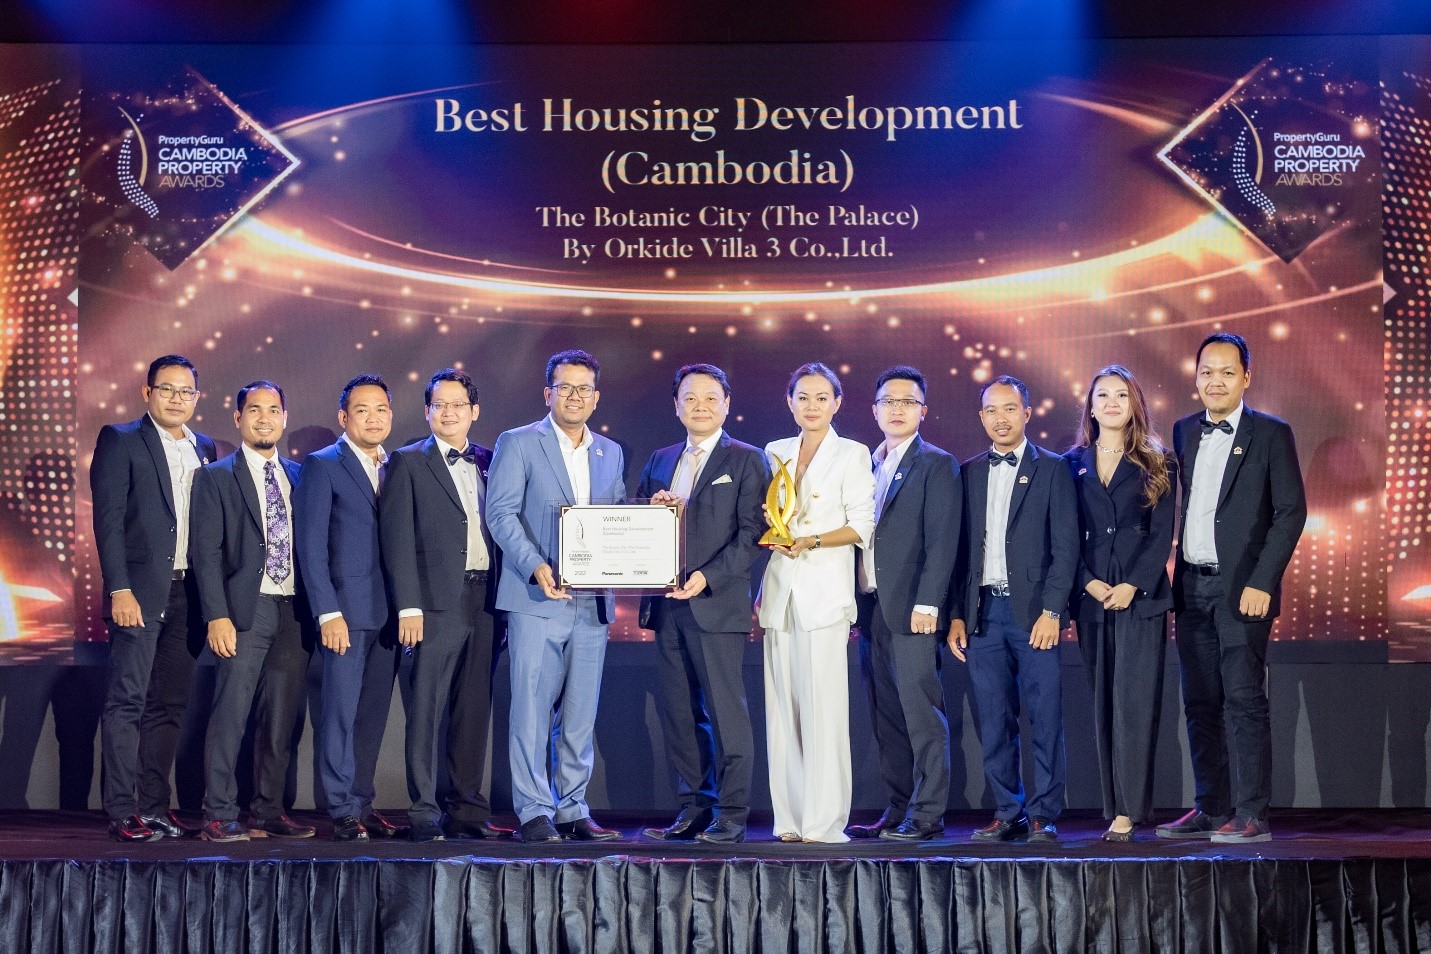 Panasonic applauses the best of Cambodia’s real-estate sector in Property Guru Cambodia Property Awards 2022